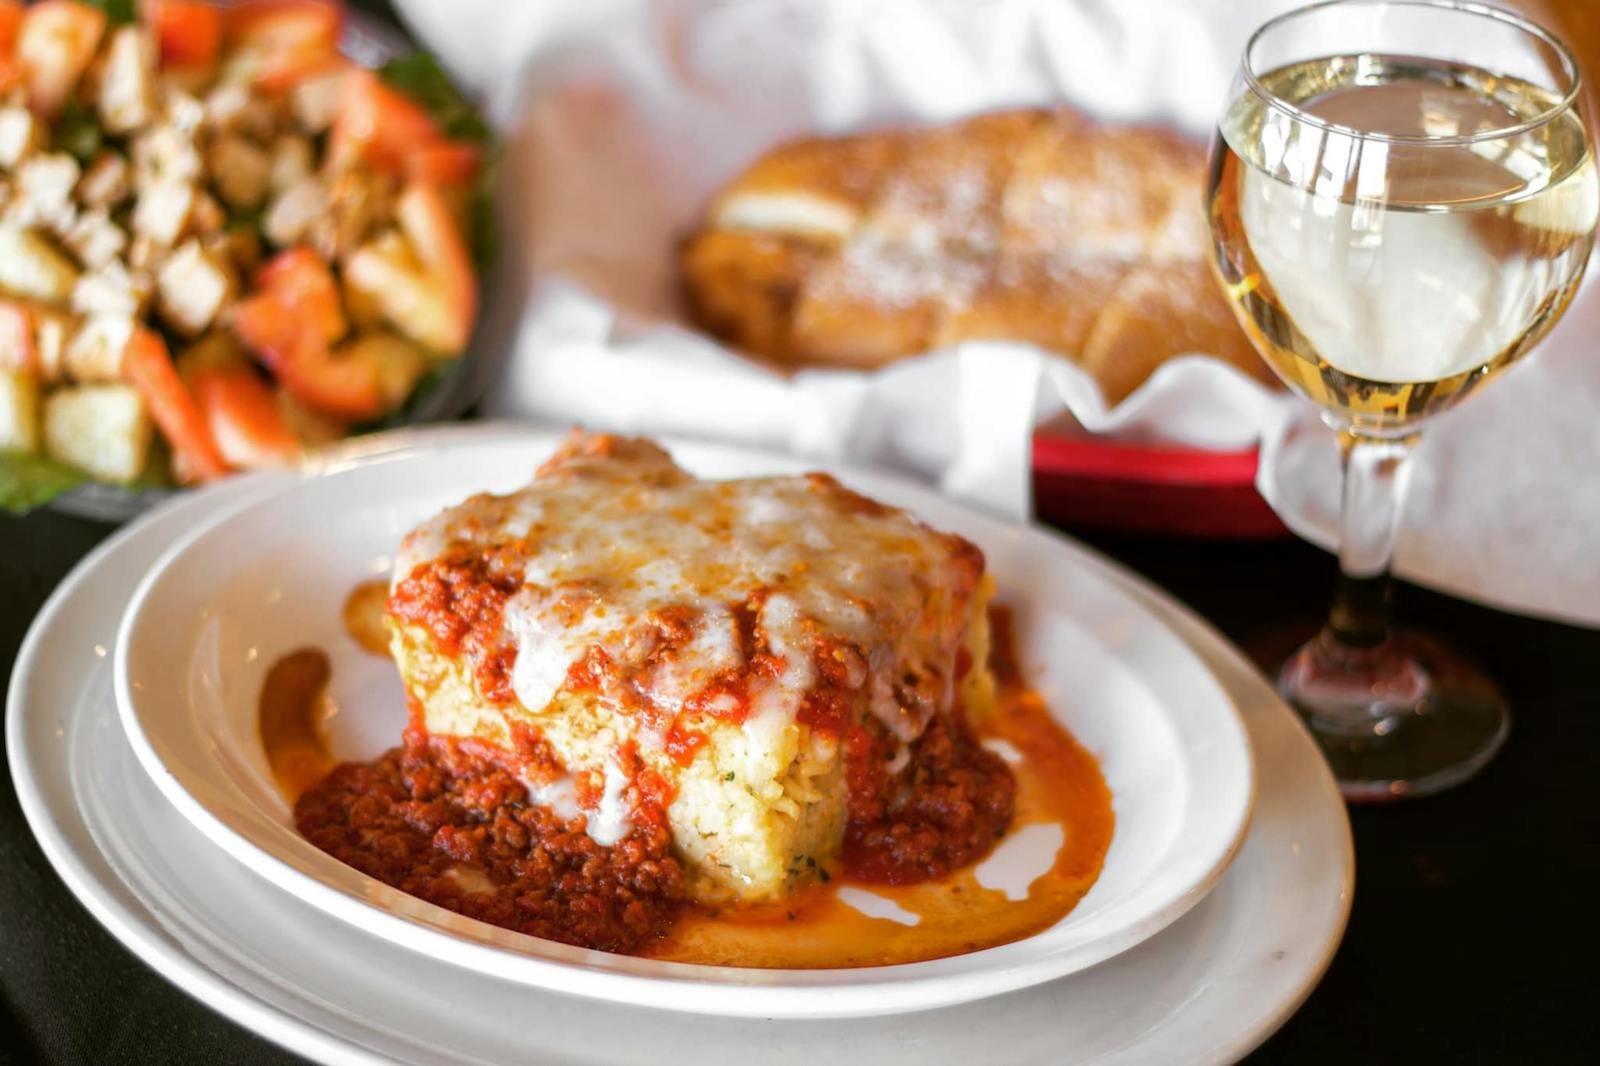 Image of a piece of lasagna and a glass of white wine from Floridino's